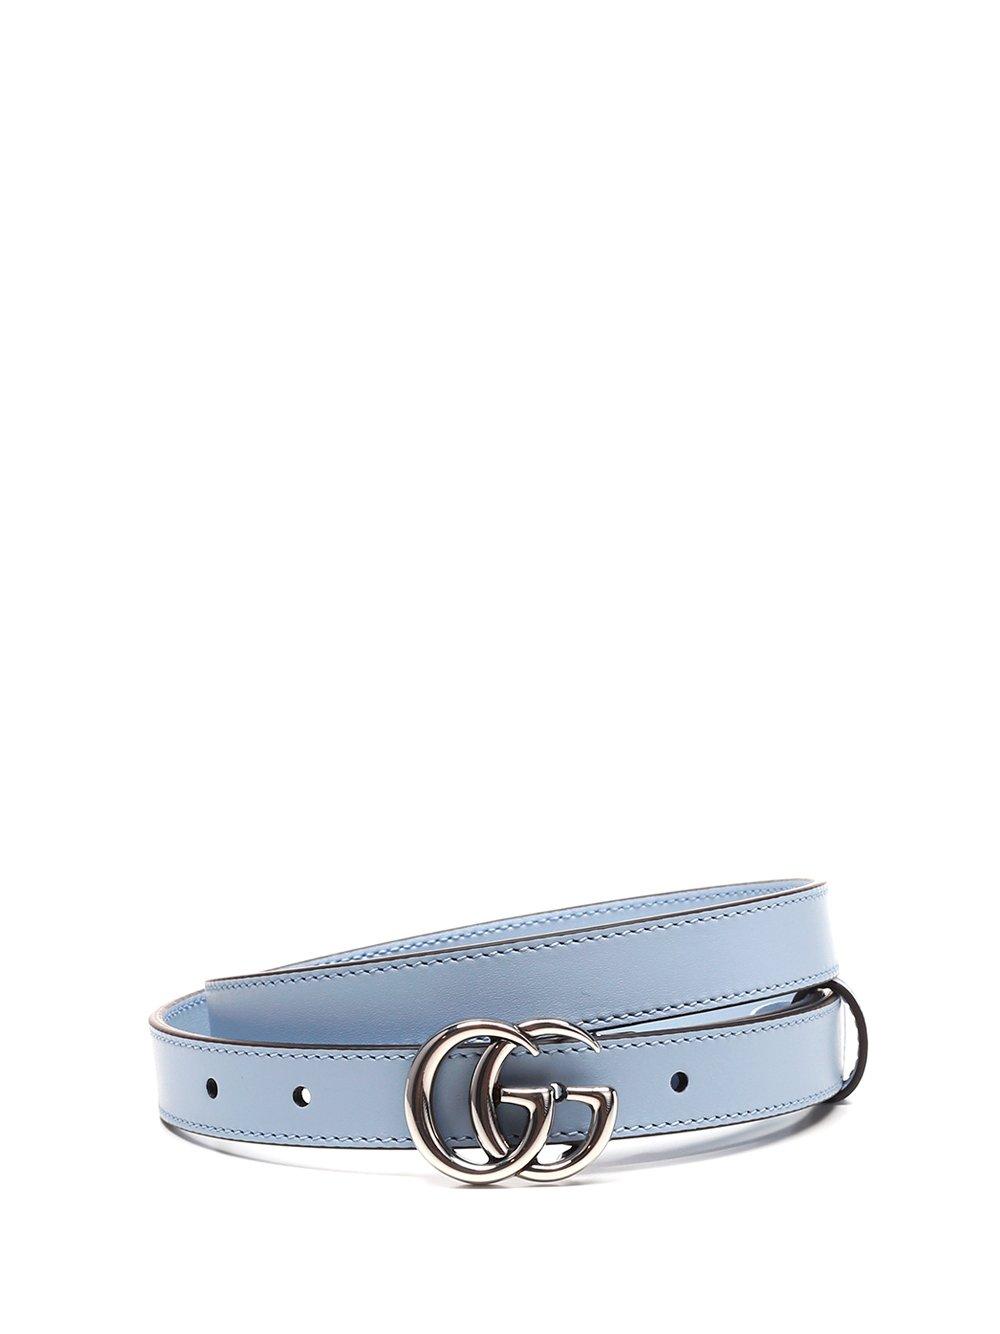 Gucci Thin Belt Double G Buckle .8 Width Pastel Blue in Calfskin Leather  with Palladium-tone - US